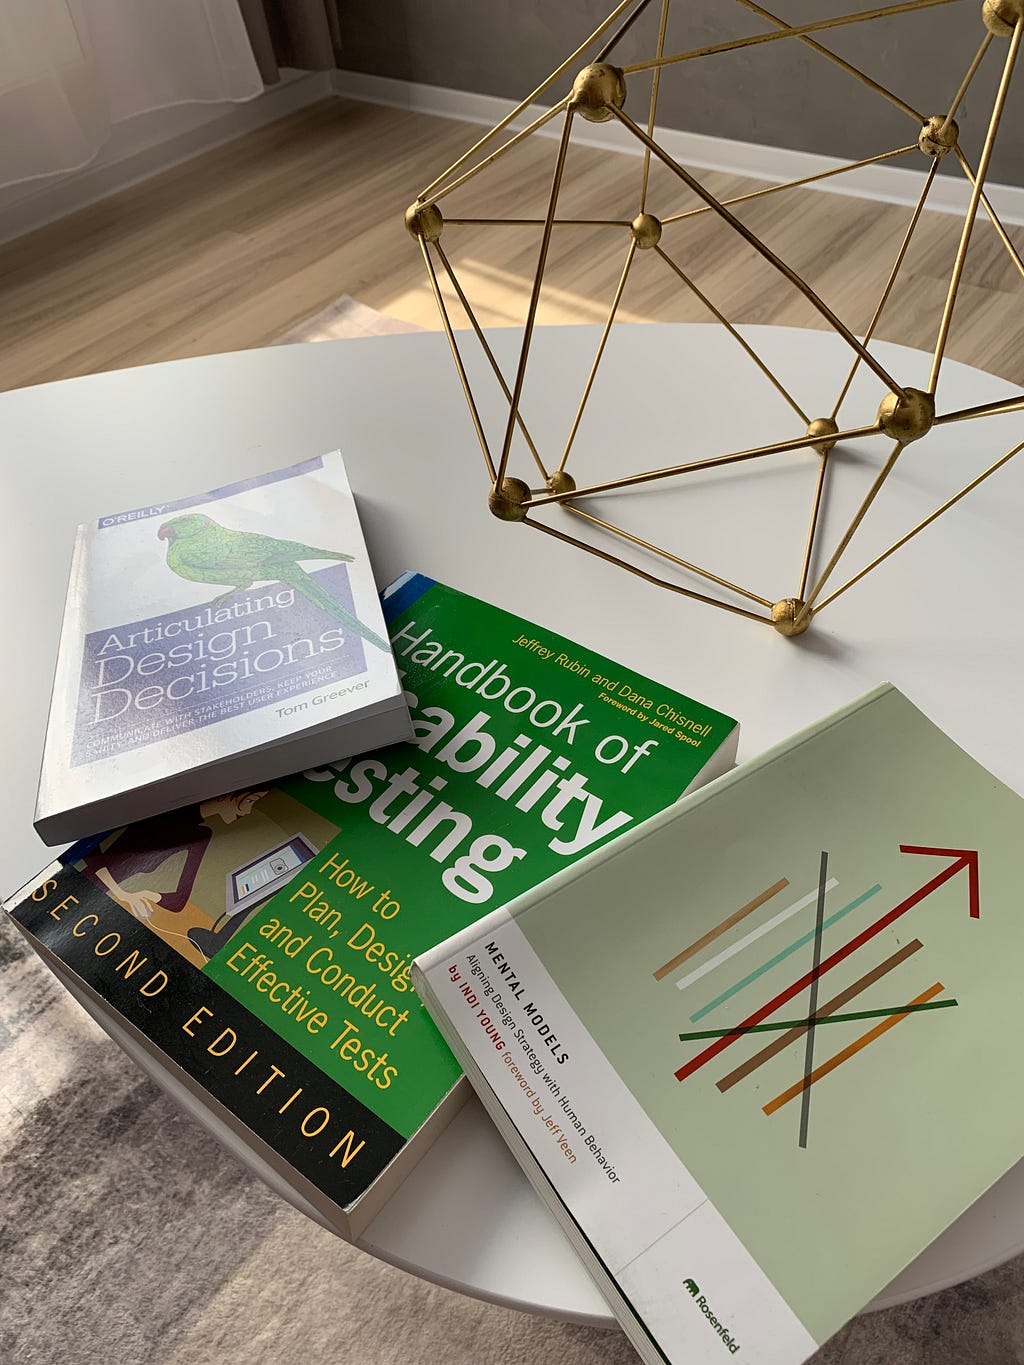 The three favourite books of Andrei on a white table in a living room. A gold geometric structure is on the table too.